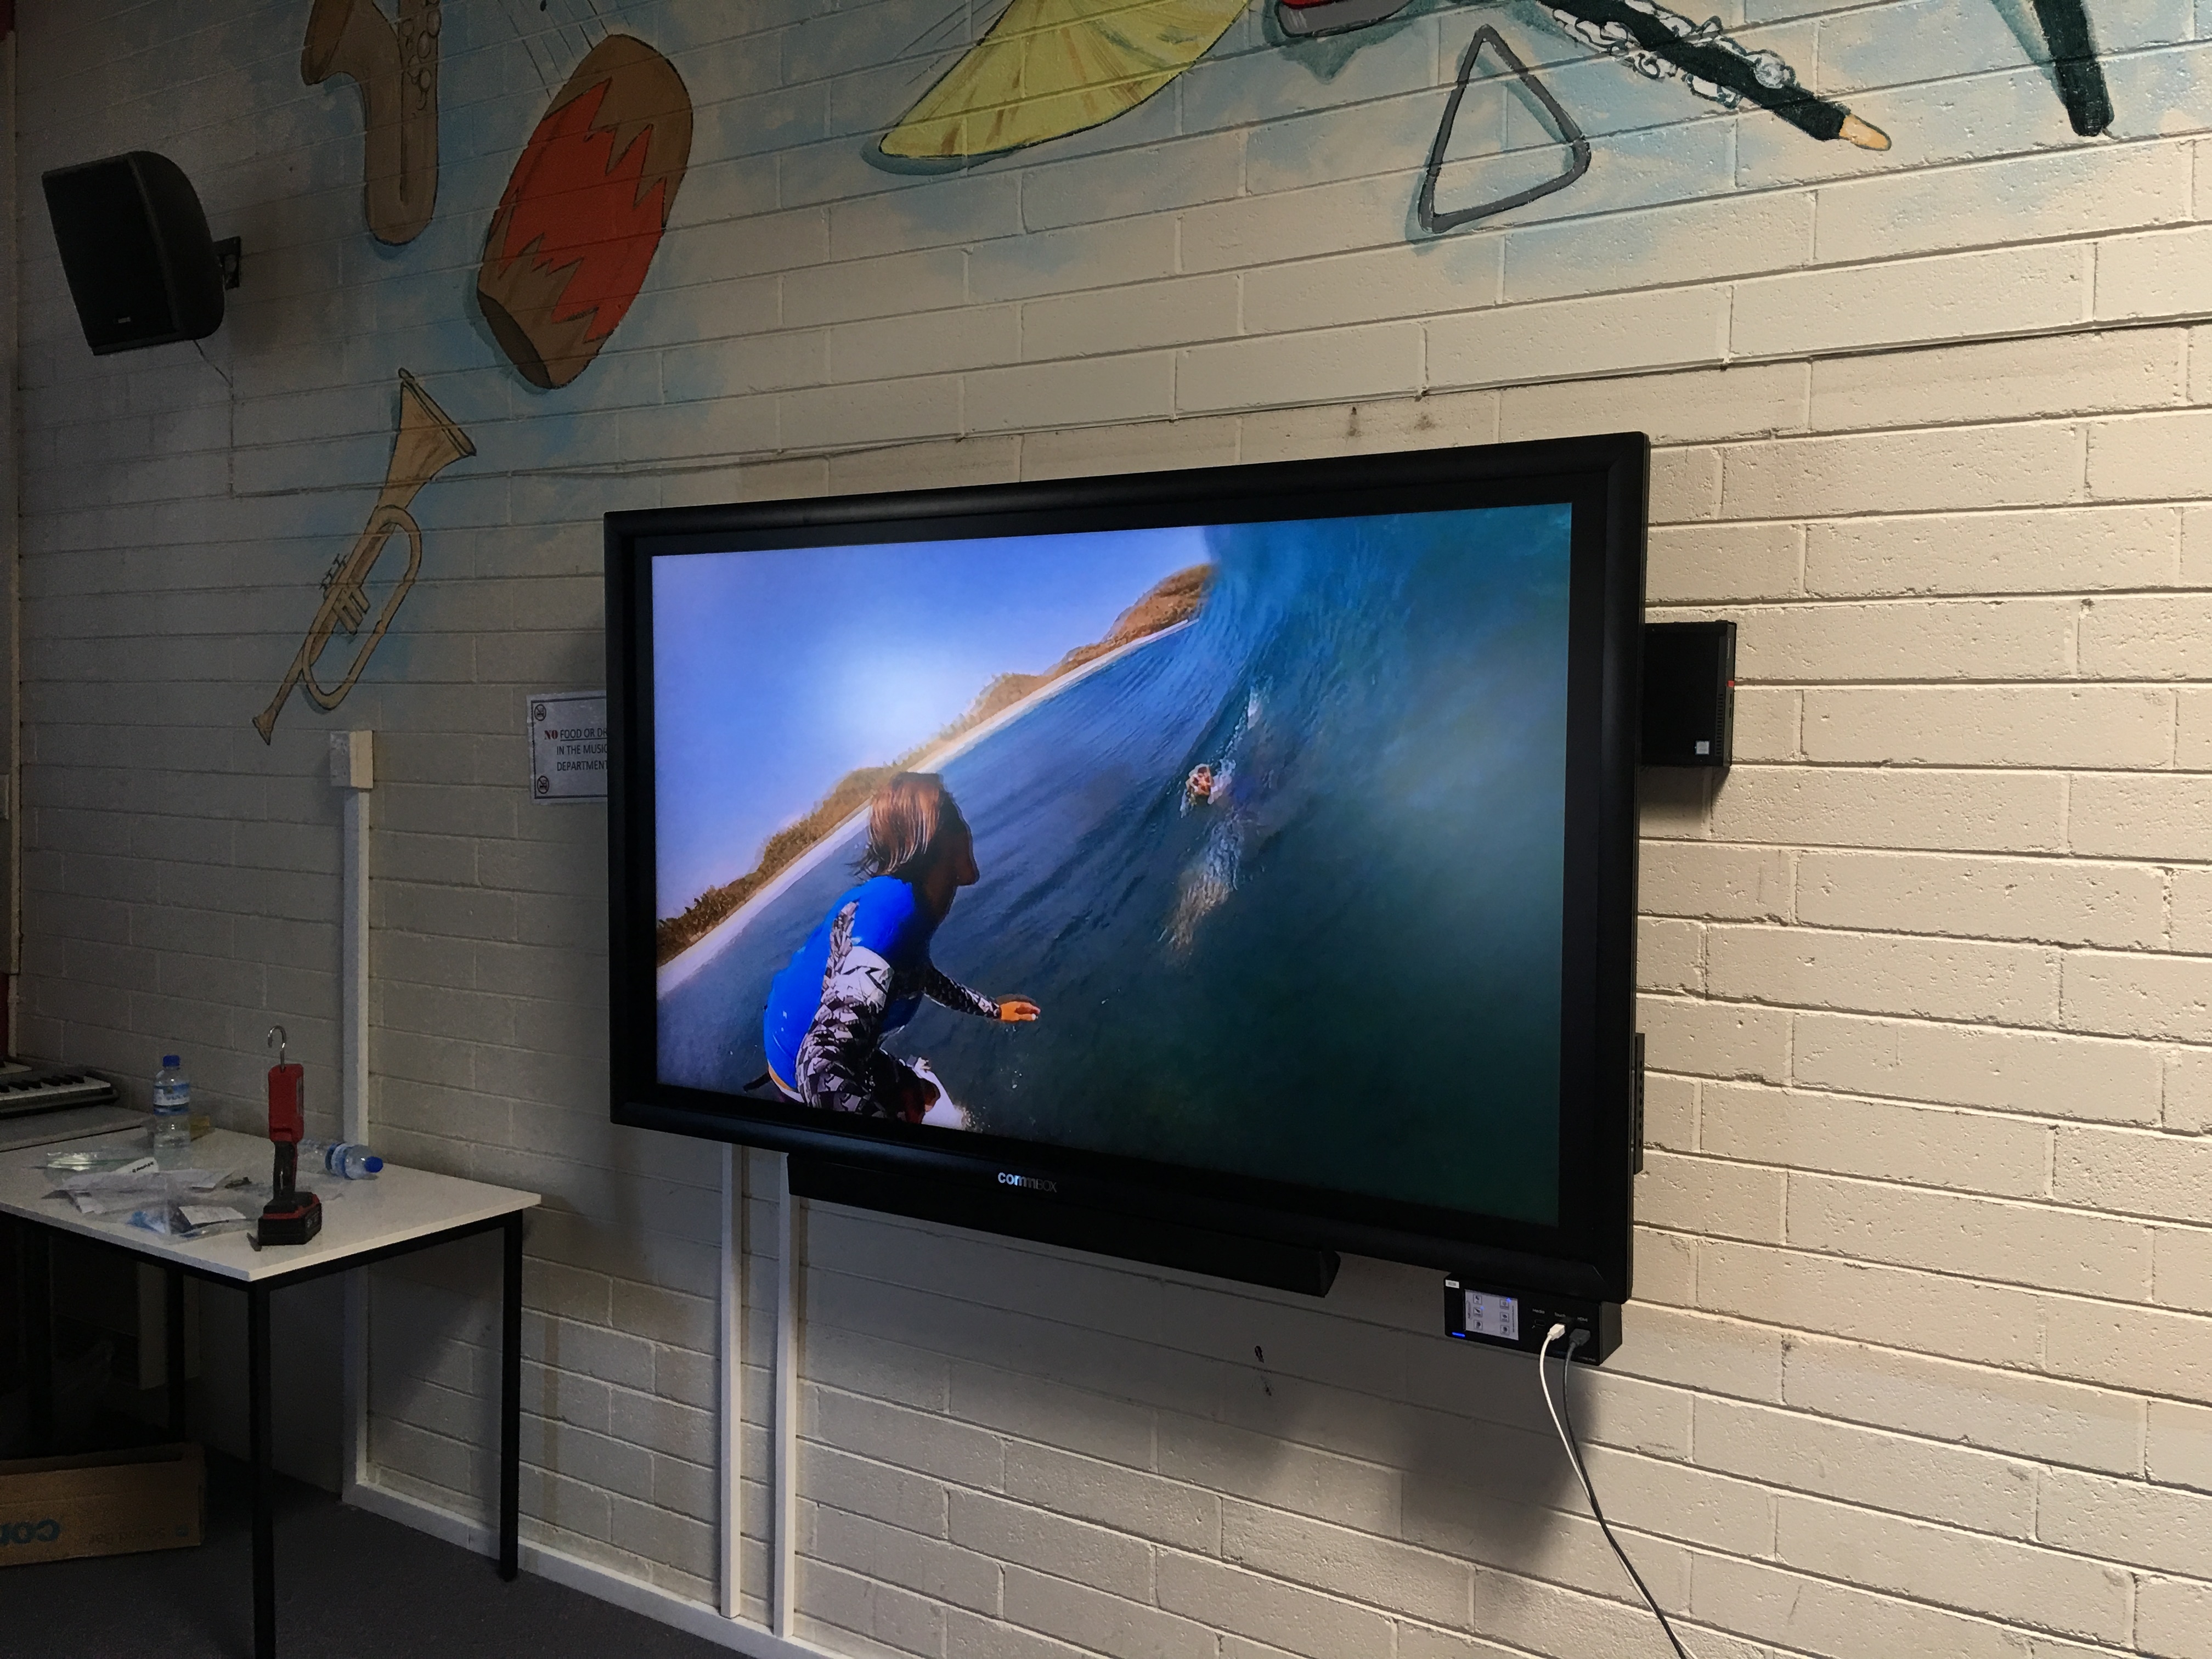 80" CommBox touch monitor for Yarra Valley Grammar